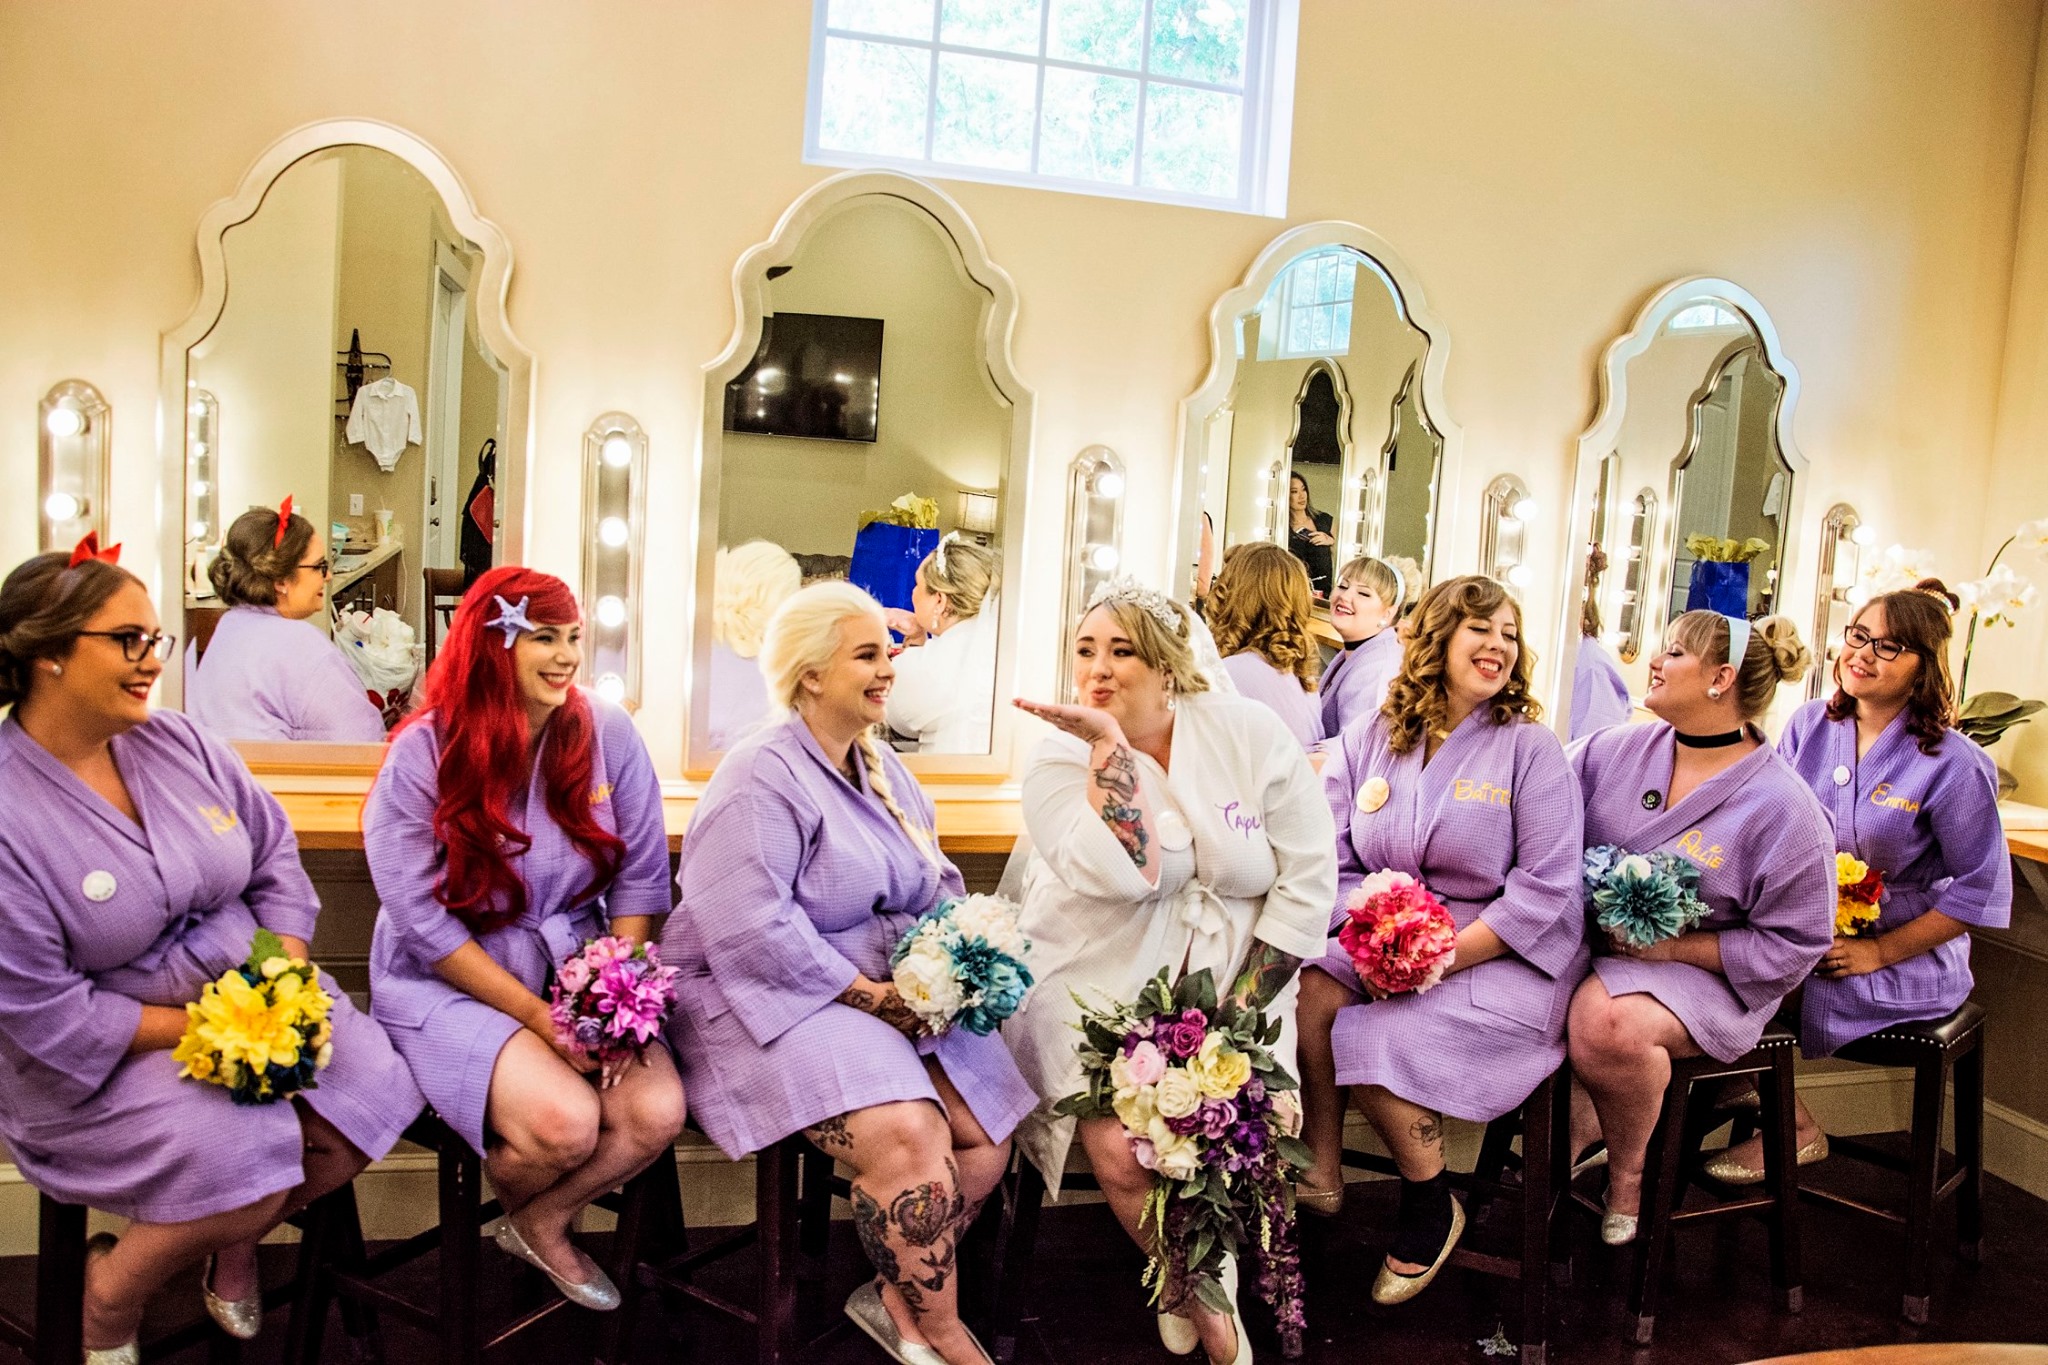 PHOTO: Bridesmaids join the bride ahead of the Disney-themed wedding of Taylor and Ryan Chewning of Jacksonville, Florida, May 17, 2019.